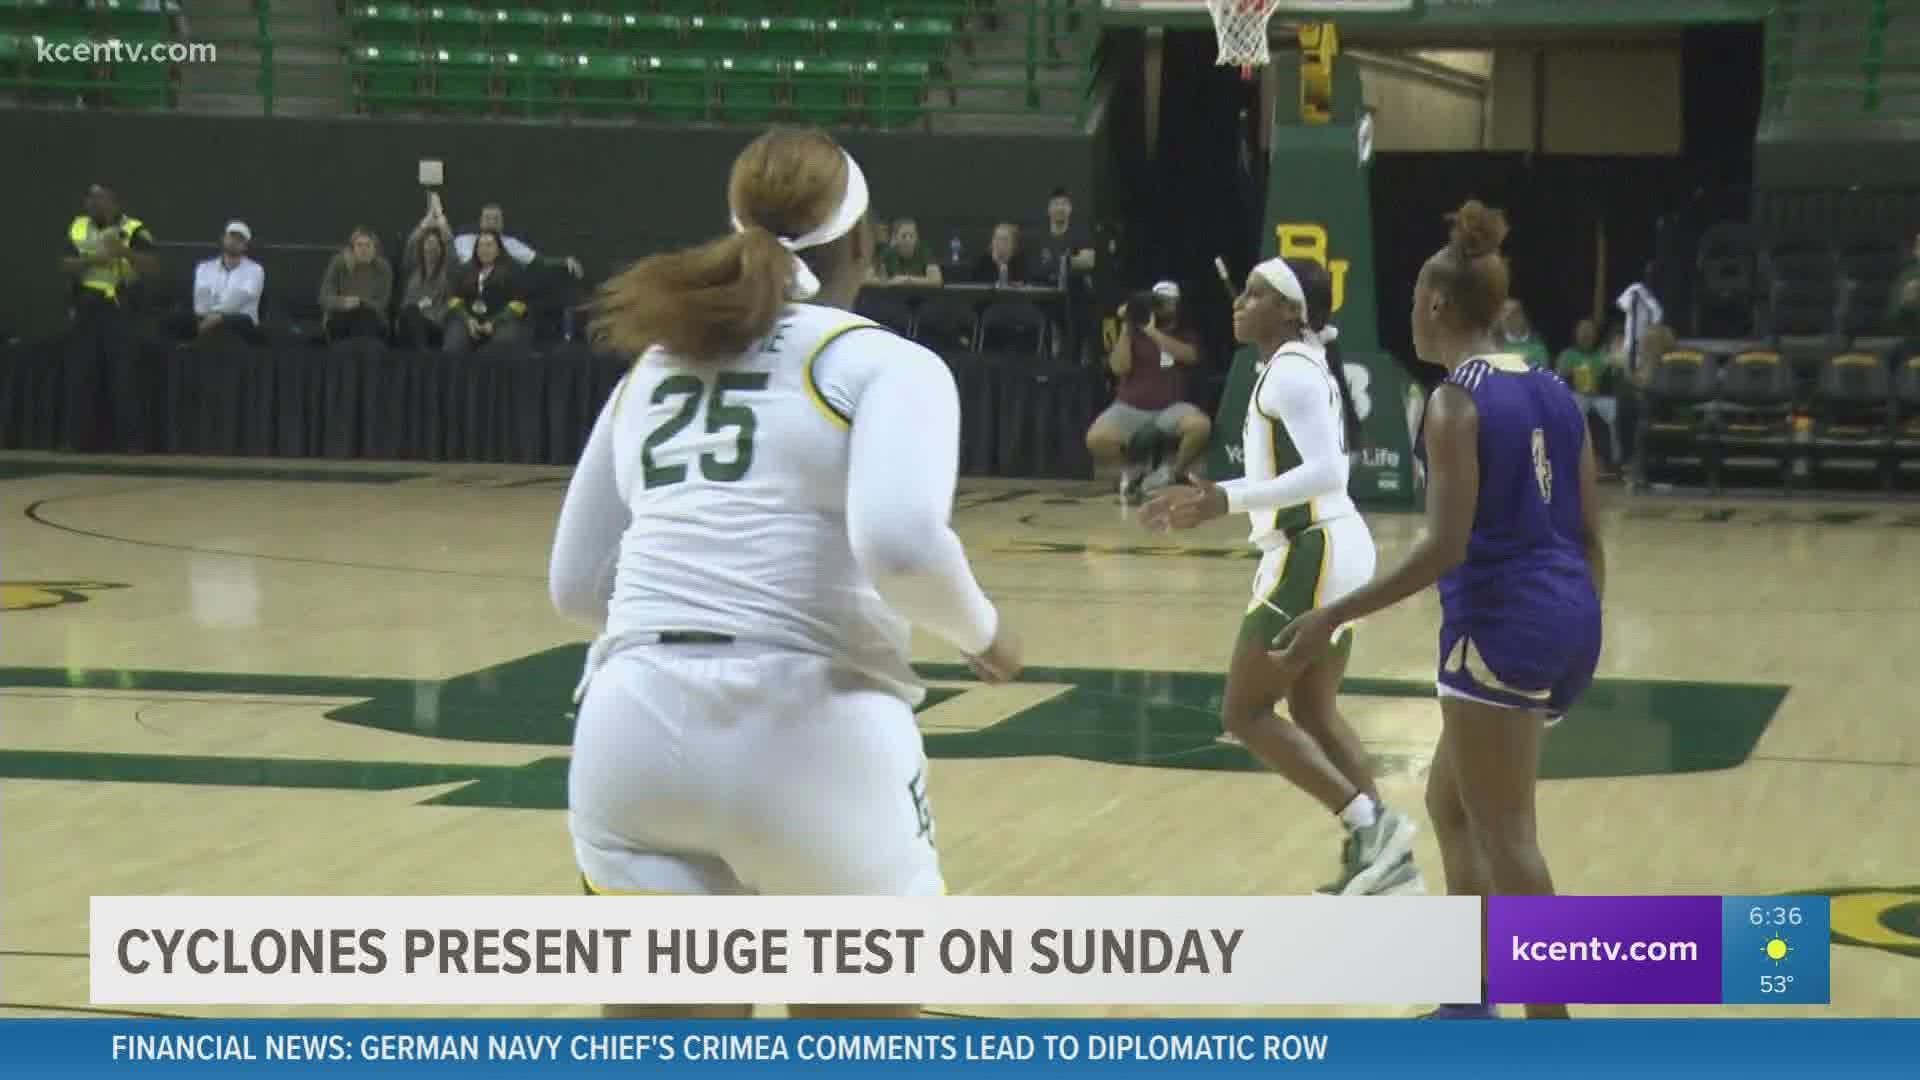 The Baylor women's basketball team will face Iowa State on Sunday